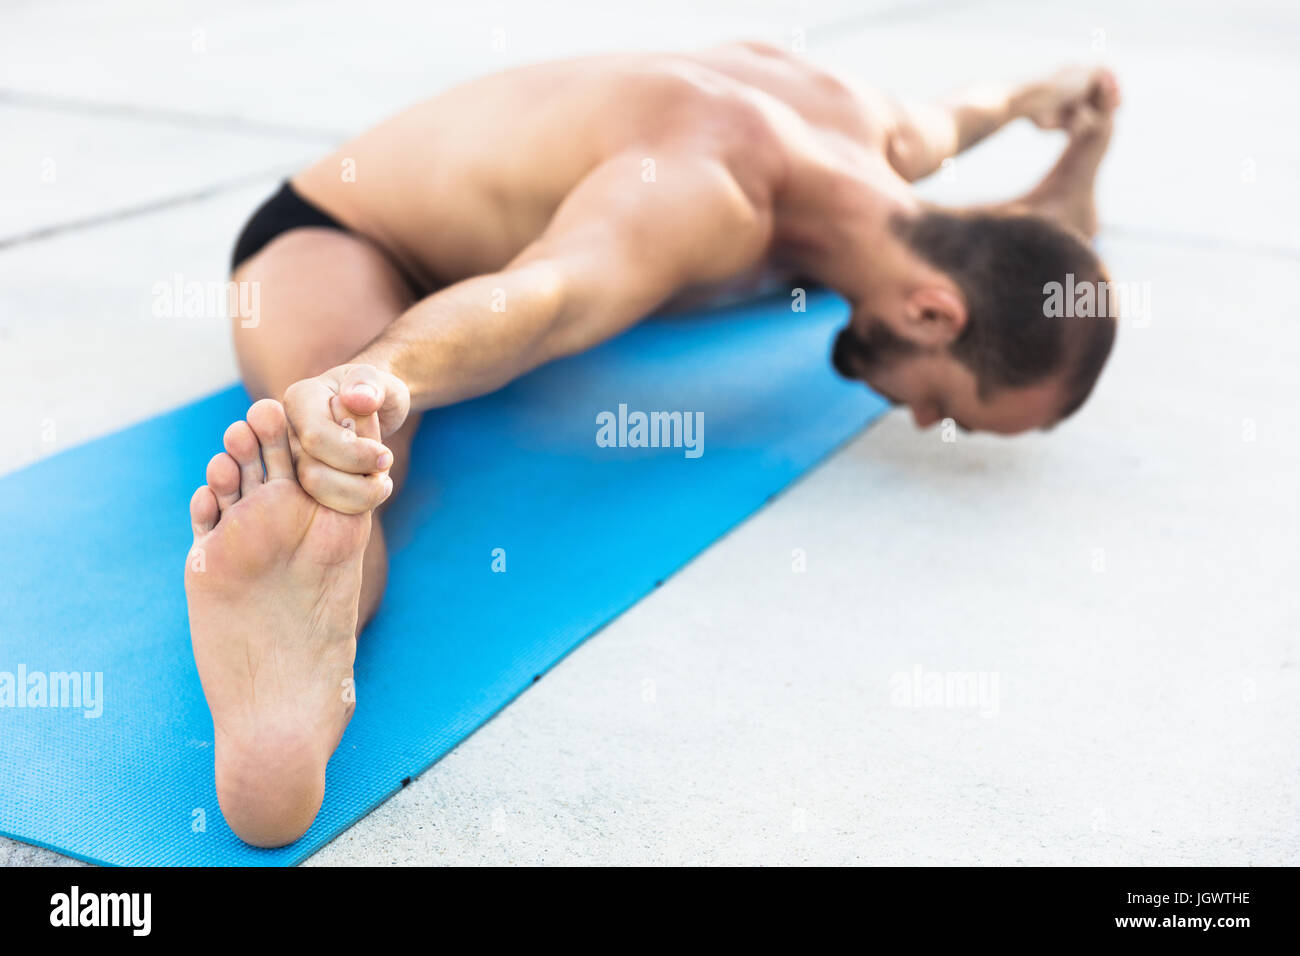 Man practicing yoga, sitting on yoga mat doing the splits and touching toes Stock Photo